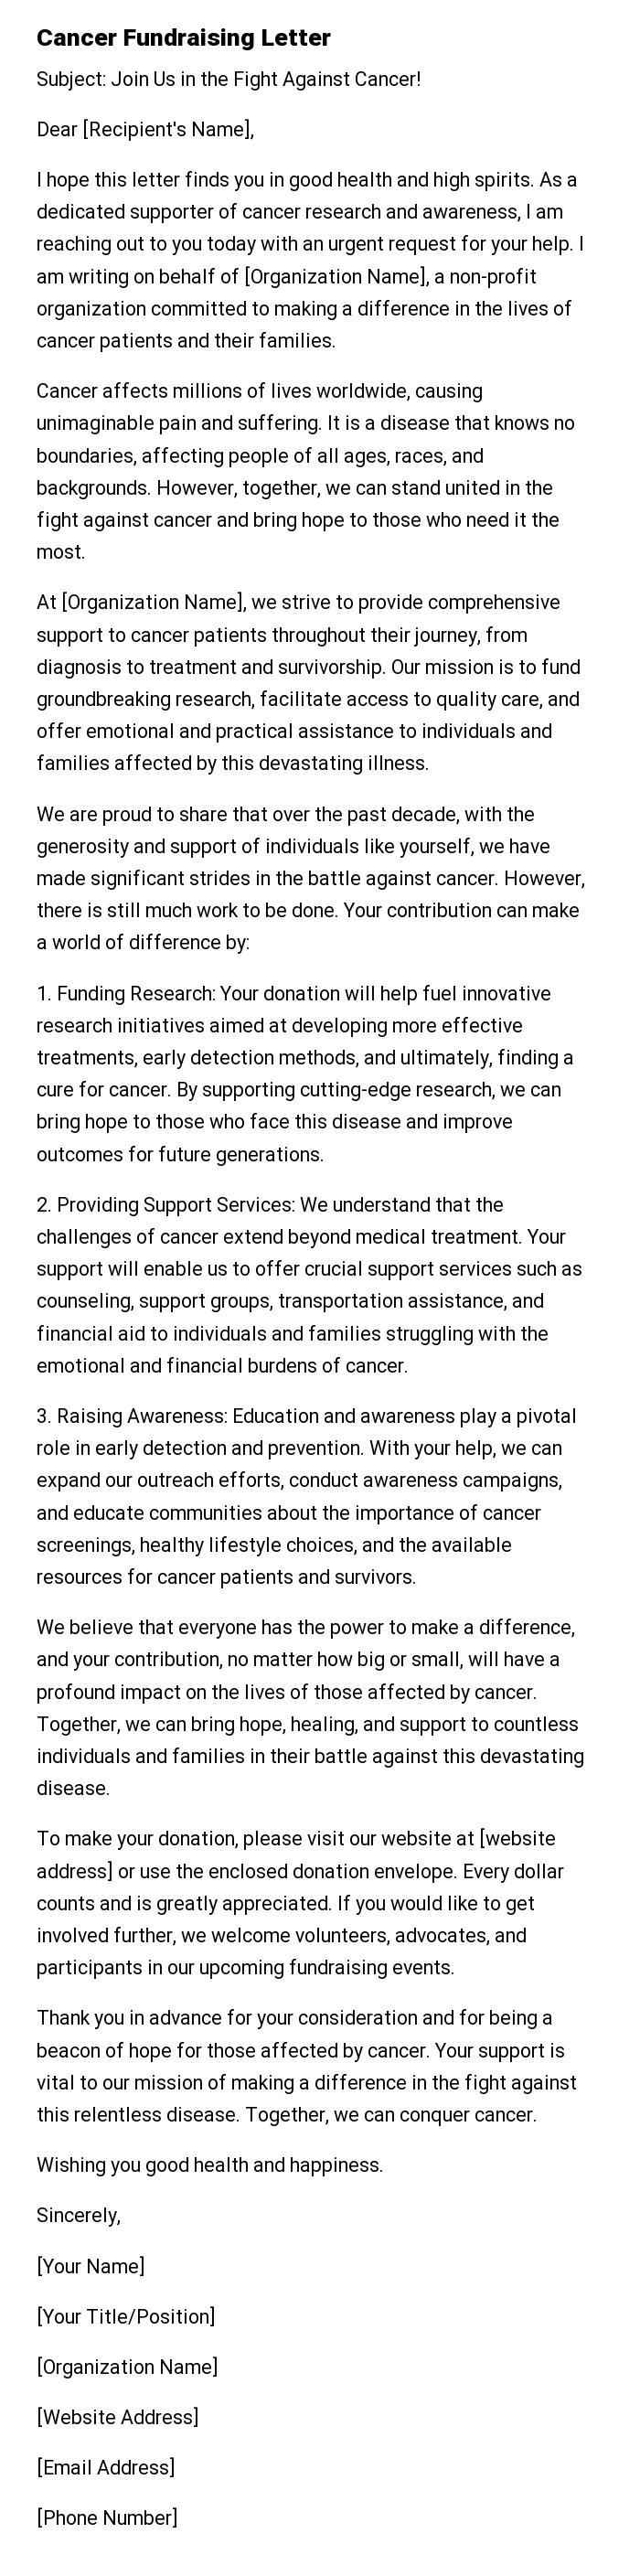 Cancer Fundraising Letter